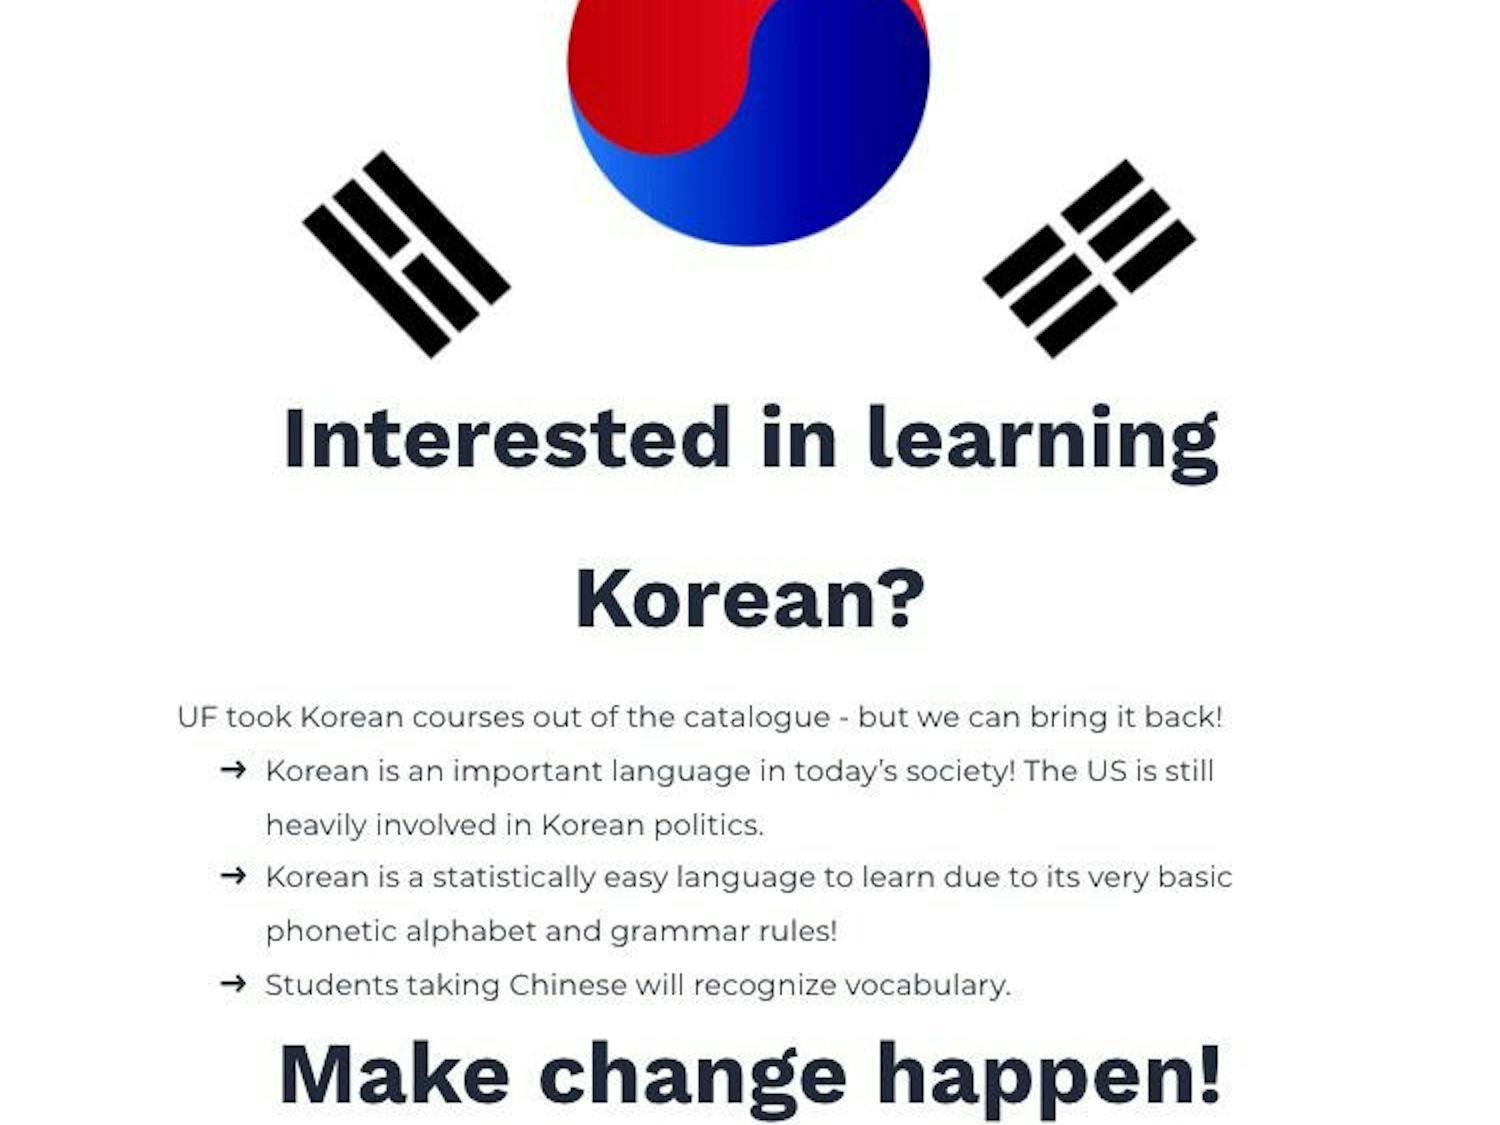 Avery Chambers, a 19-year-old UF Chinese freshman, made fliers to encourage students to help bring the Korean language program back to UF.